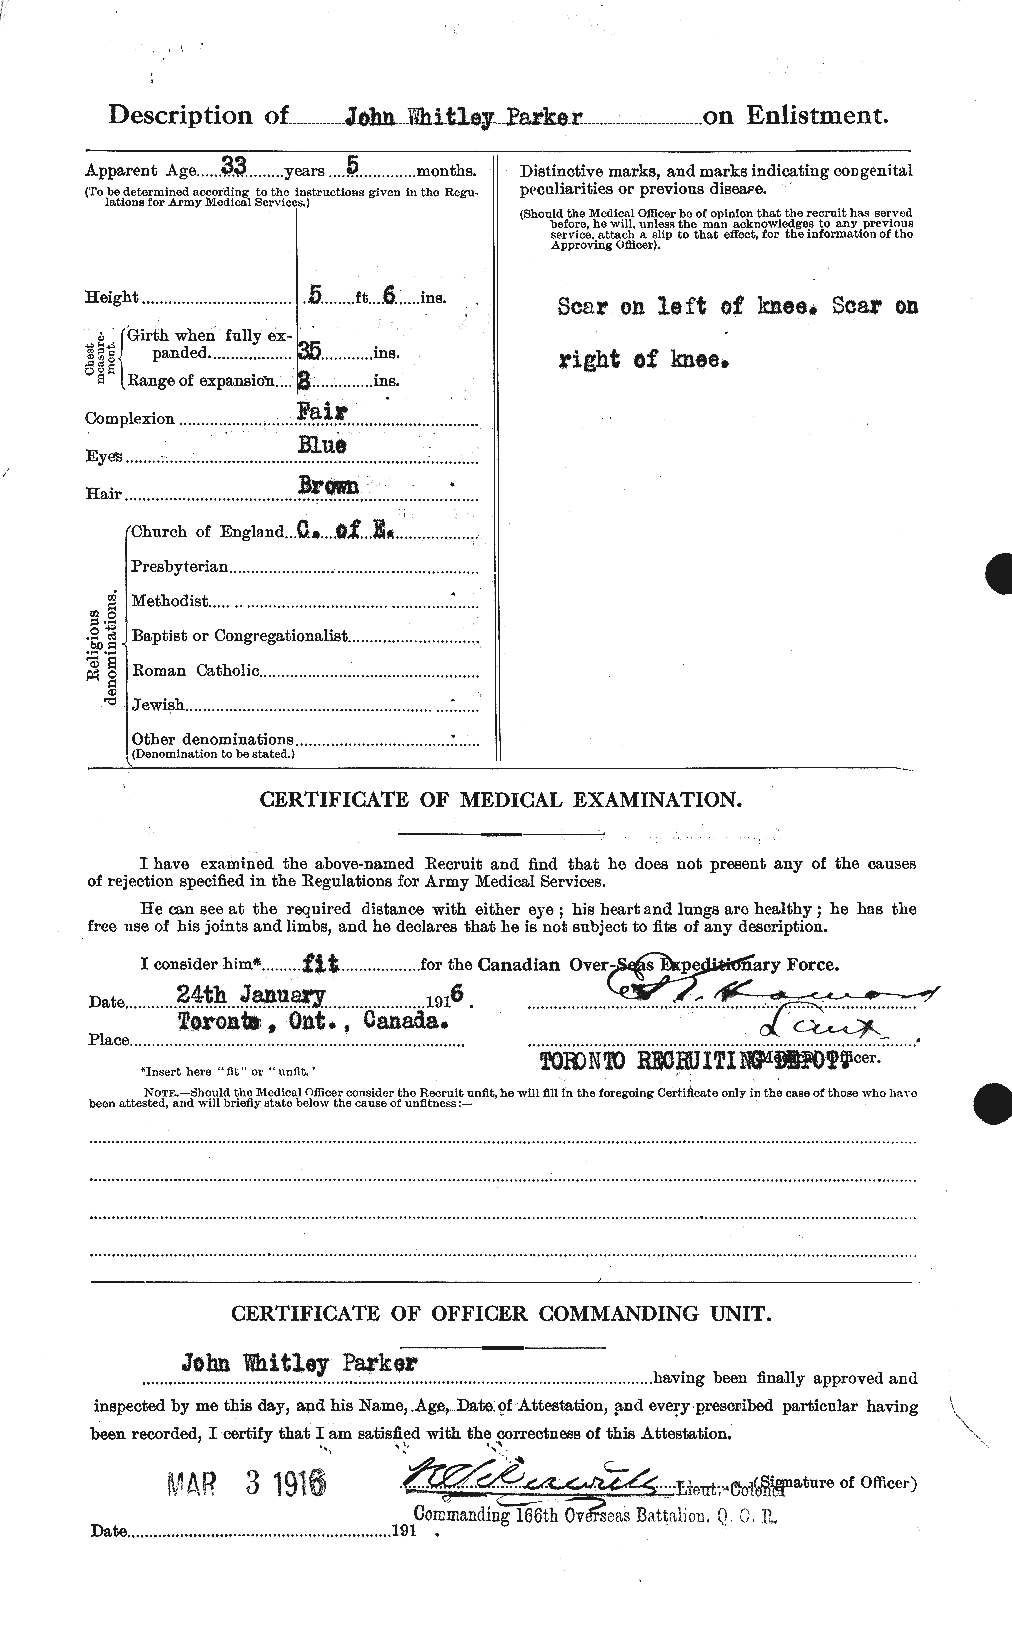 Personnel Records of the First World War - CEF 565493b